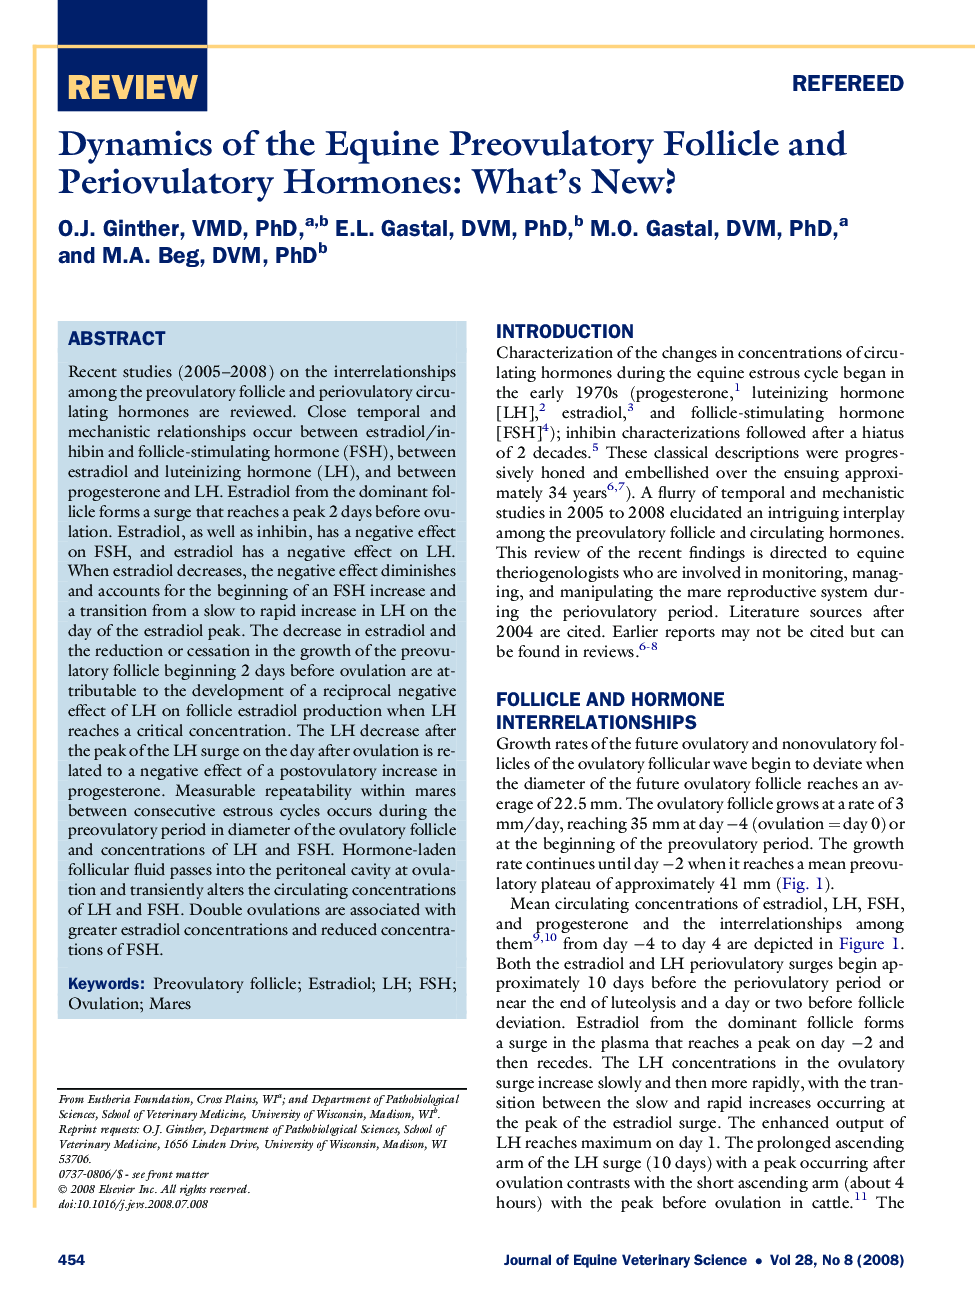 Dynamics of the Equine Preovulatory Follicle and Periovulatory Hormones: What's New? 